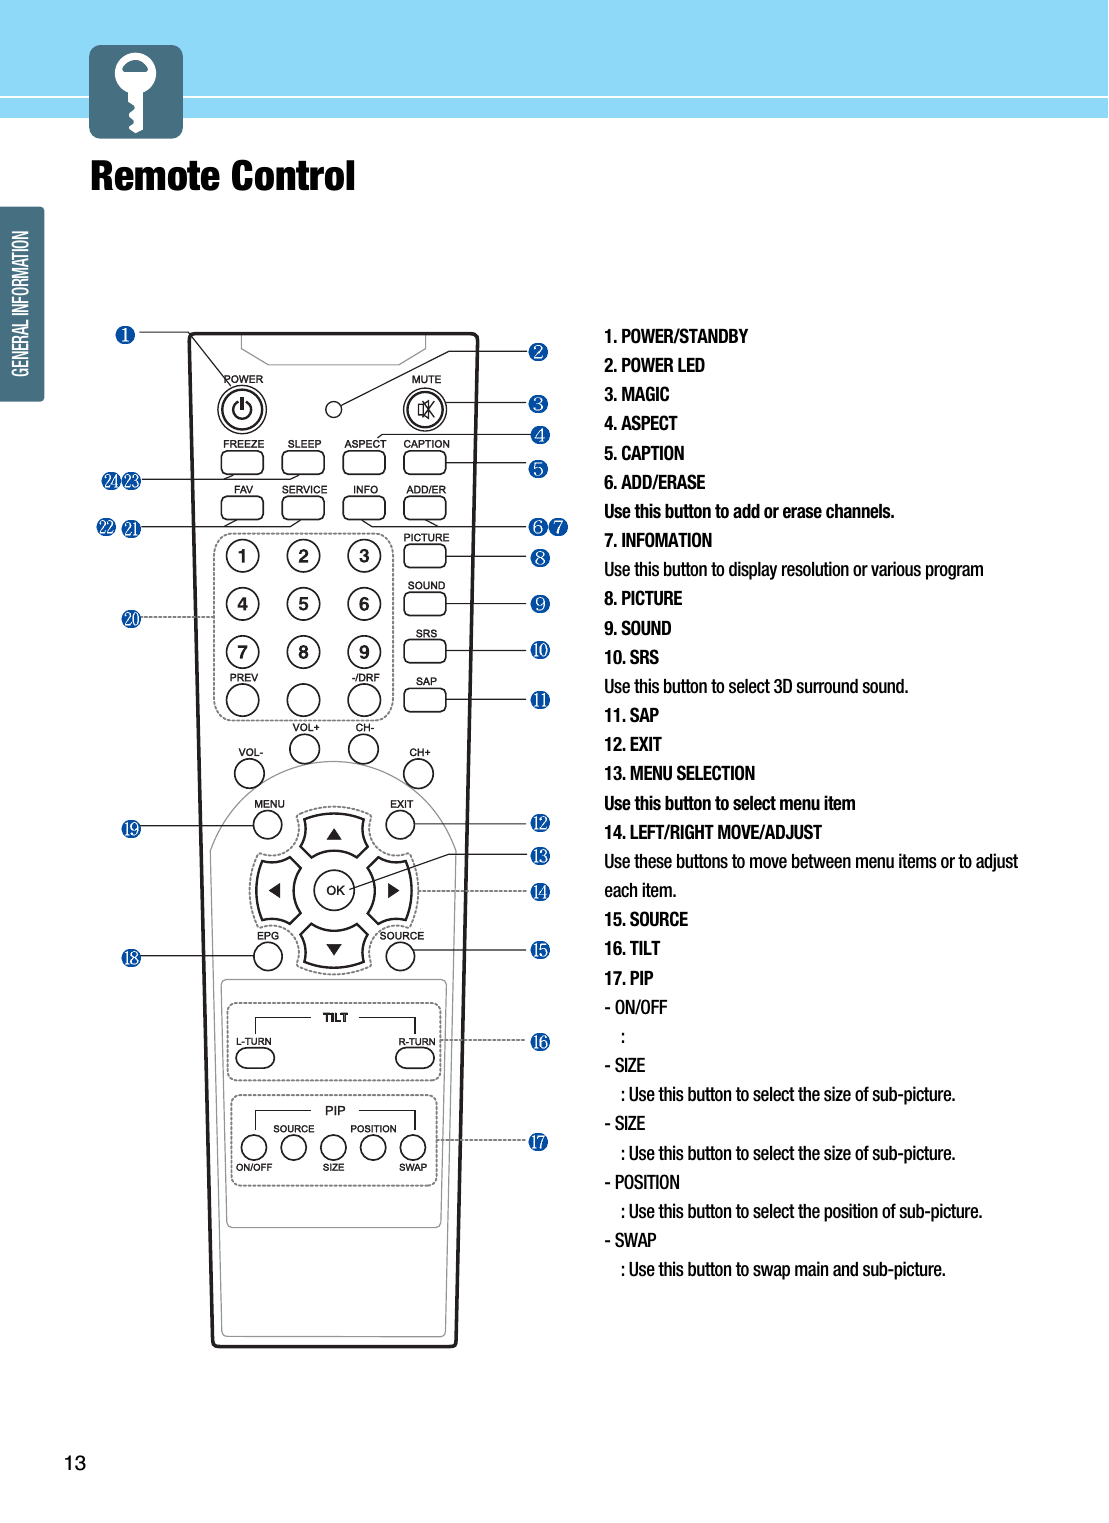 13GENERAL INFORMATIONRemote Control 1. POWER/STANDBY2. POWER LED3. MAGIC4. ASPECT5. CAPTION6. ADD/ERASEUse this button to add or erase channels.7. INFOMATIONUse this button to display resolution or various program8. PICTURE 9. SOUND10. SRSUse this button to select 3D surround sound.11. SAP12. EXIT13. MENU SELECTIONUse this button to select menu item14. LEFT/RIGHT MOVE/ADJUSTUse these buttons to move between menu items or to adjusteach item.15. SOURCE16. TILT17. PIP- ON/OFF: - SIZE : Use this button to select the size of sub-picture.- SIZE : Use this button to select the size of sub-picture.- POSITION : Use this button to select the position of sub-picture.- SWAP : Use this button to swap main and sub-picture.